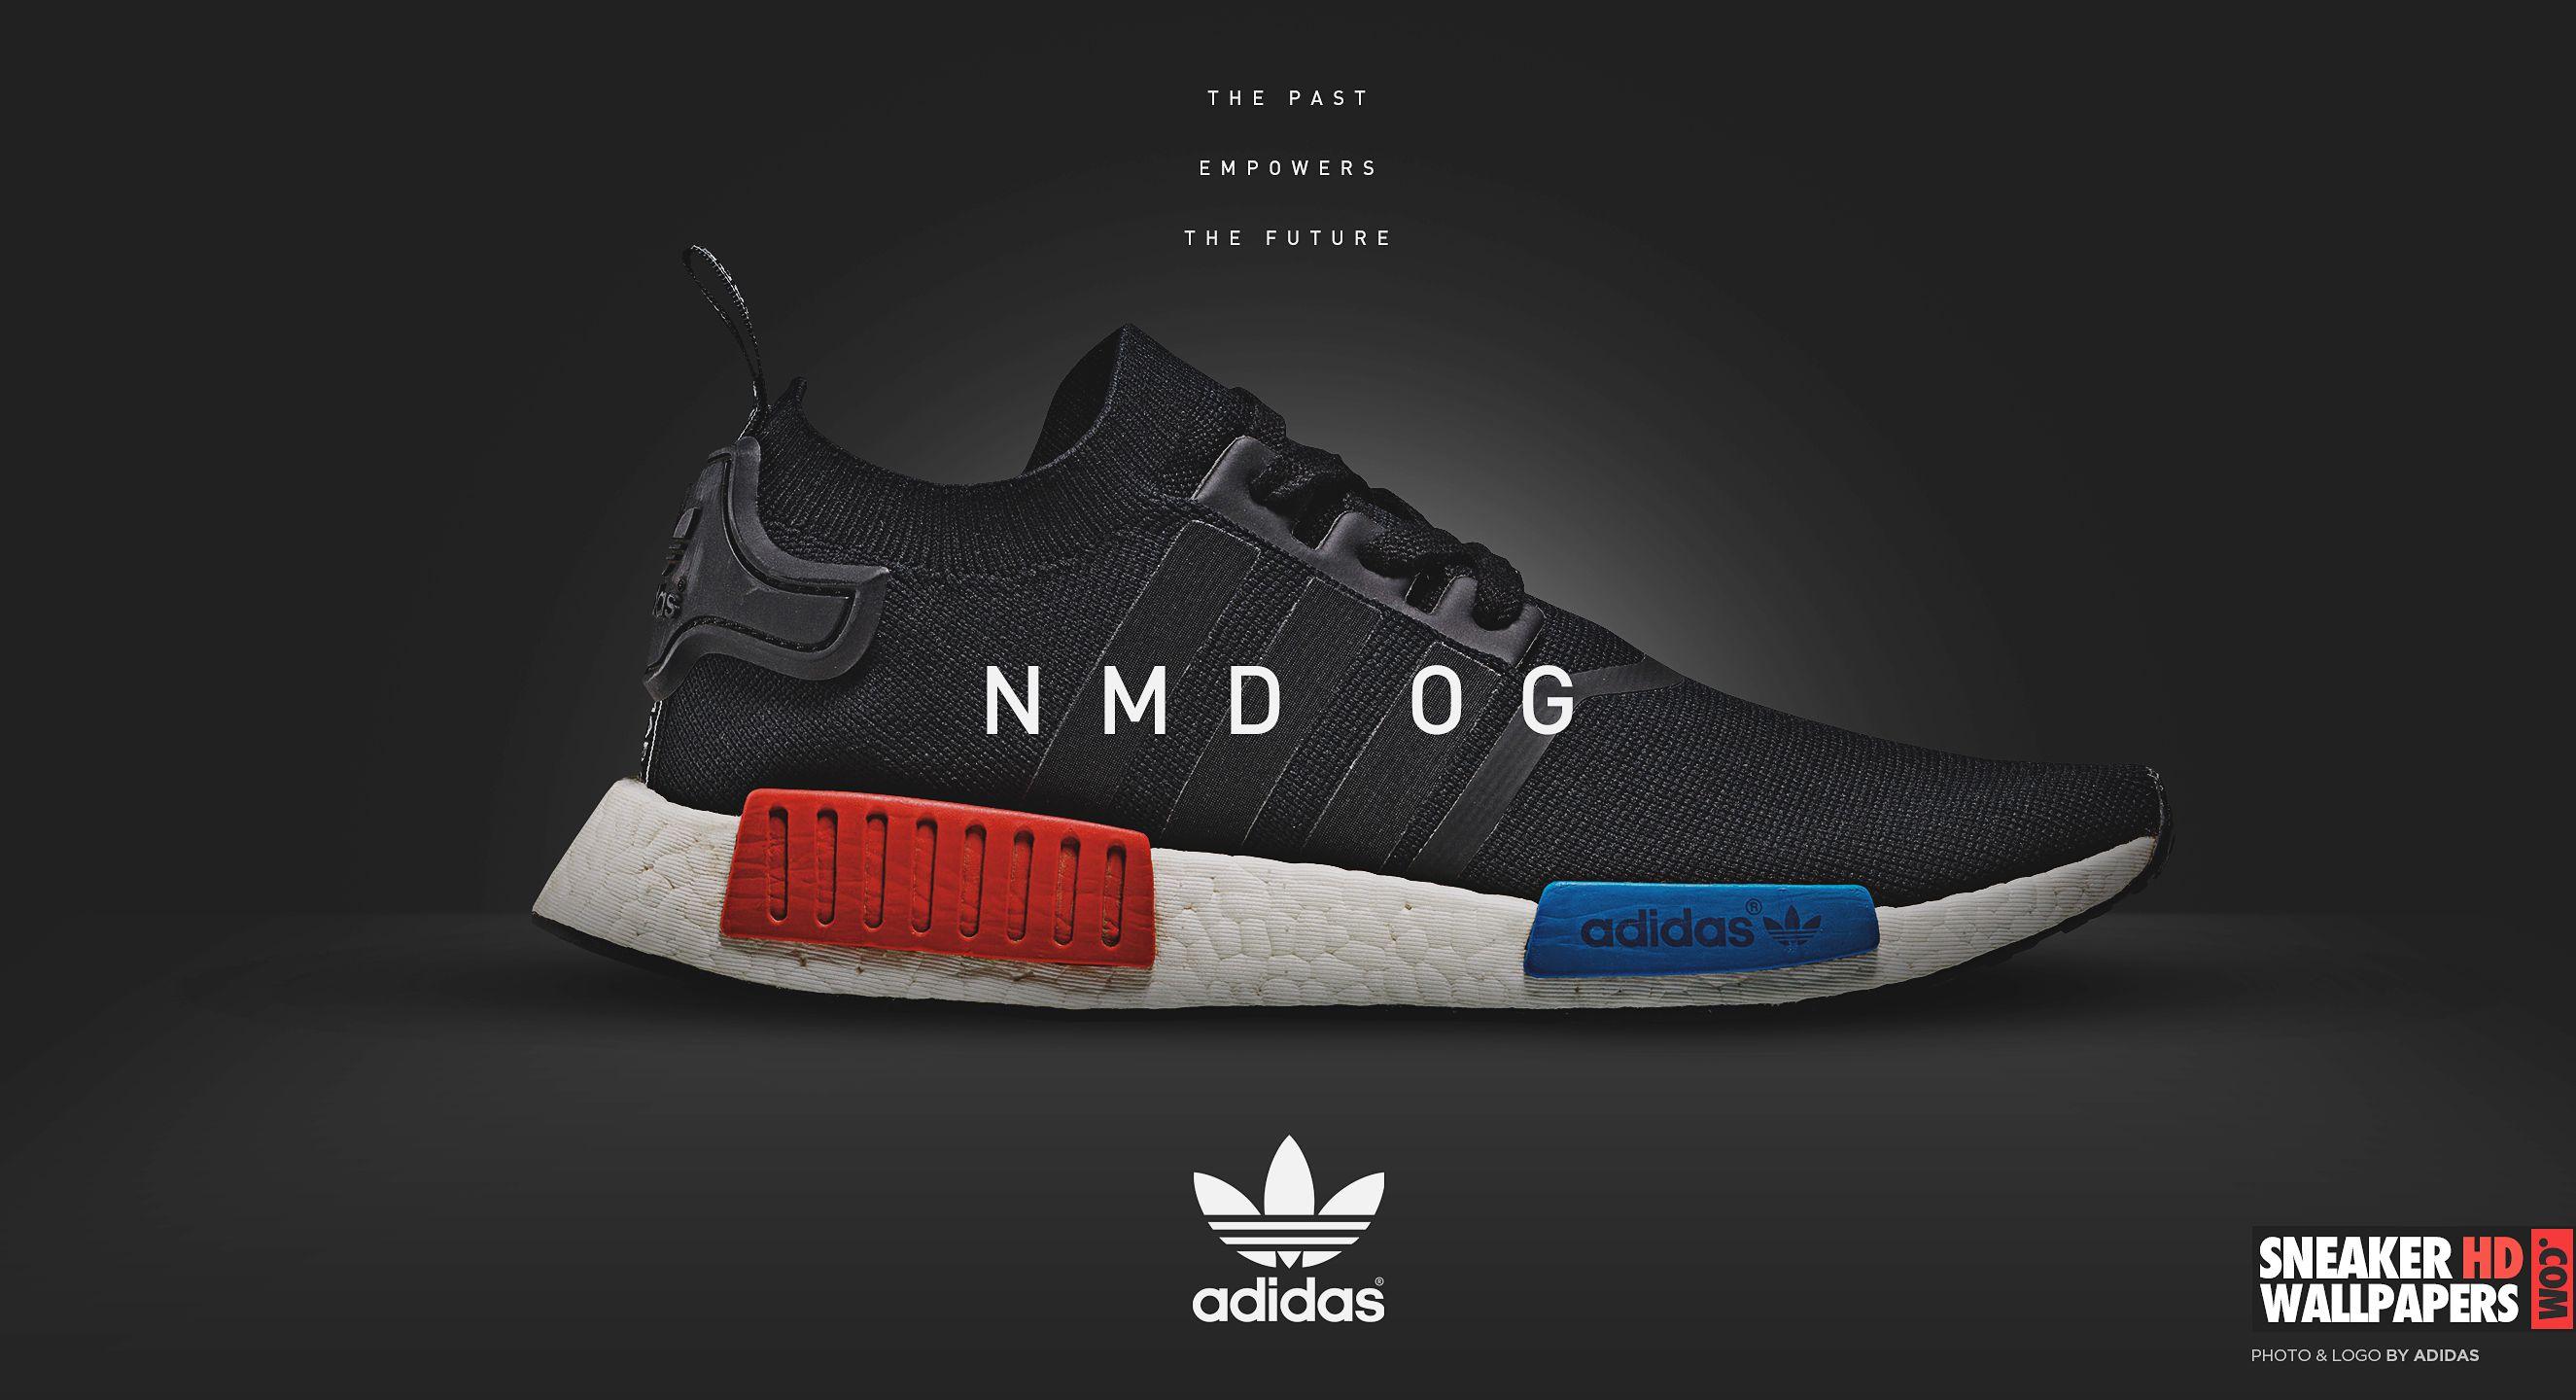 Adidas Shoes Wallpaper High Quality For iPhone Sneakerhdcom Your